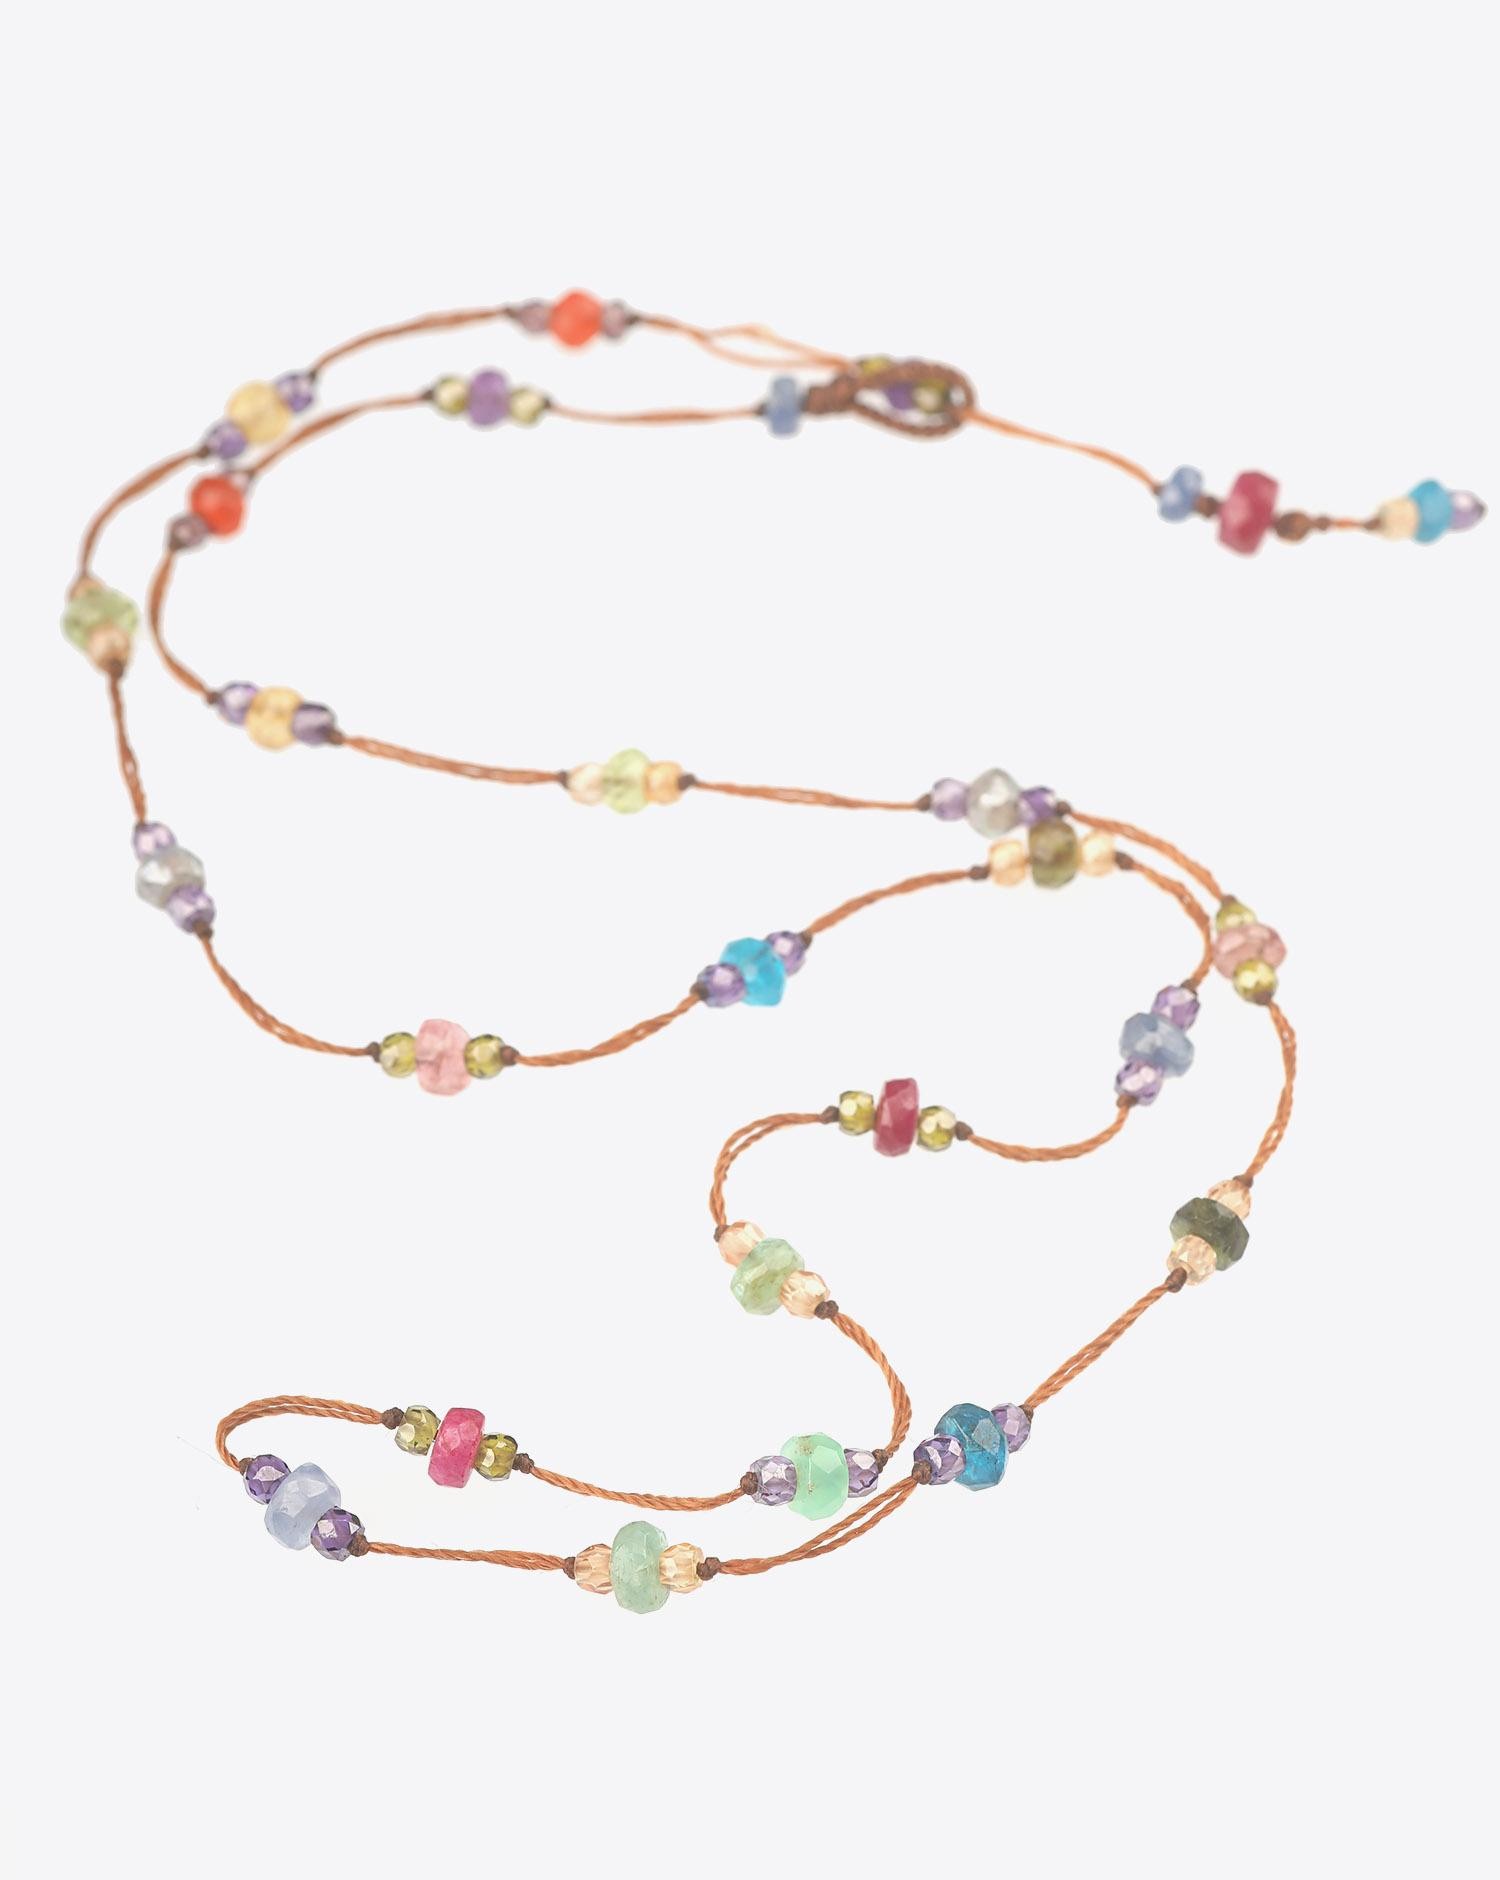 Sharing Bracelet 3 ToursCollier Court LOOPY SPARKLY - Cordon Tabac